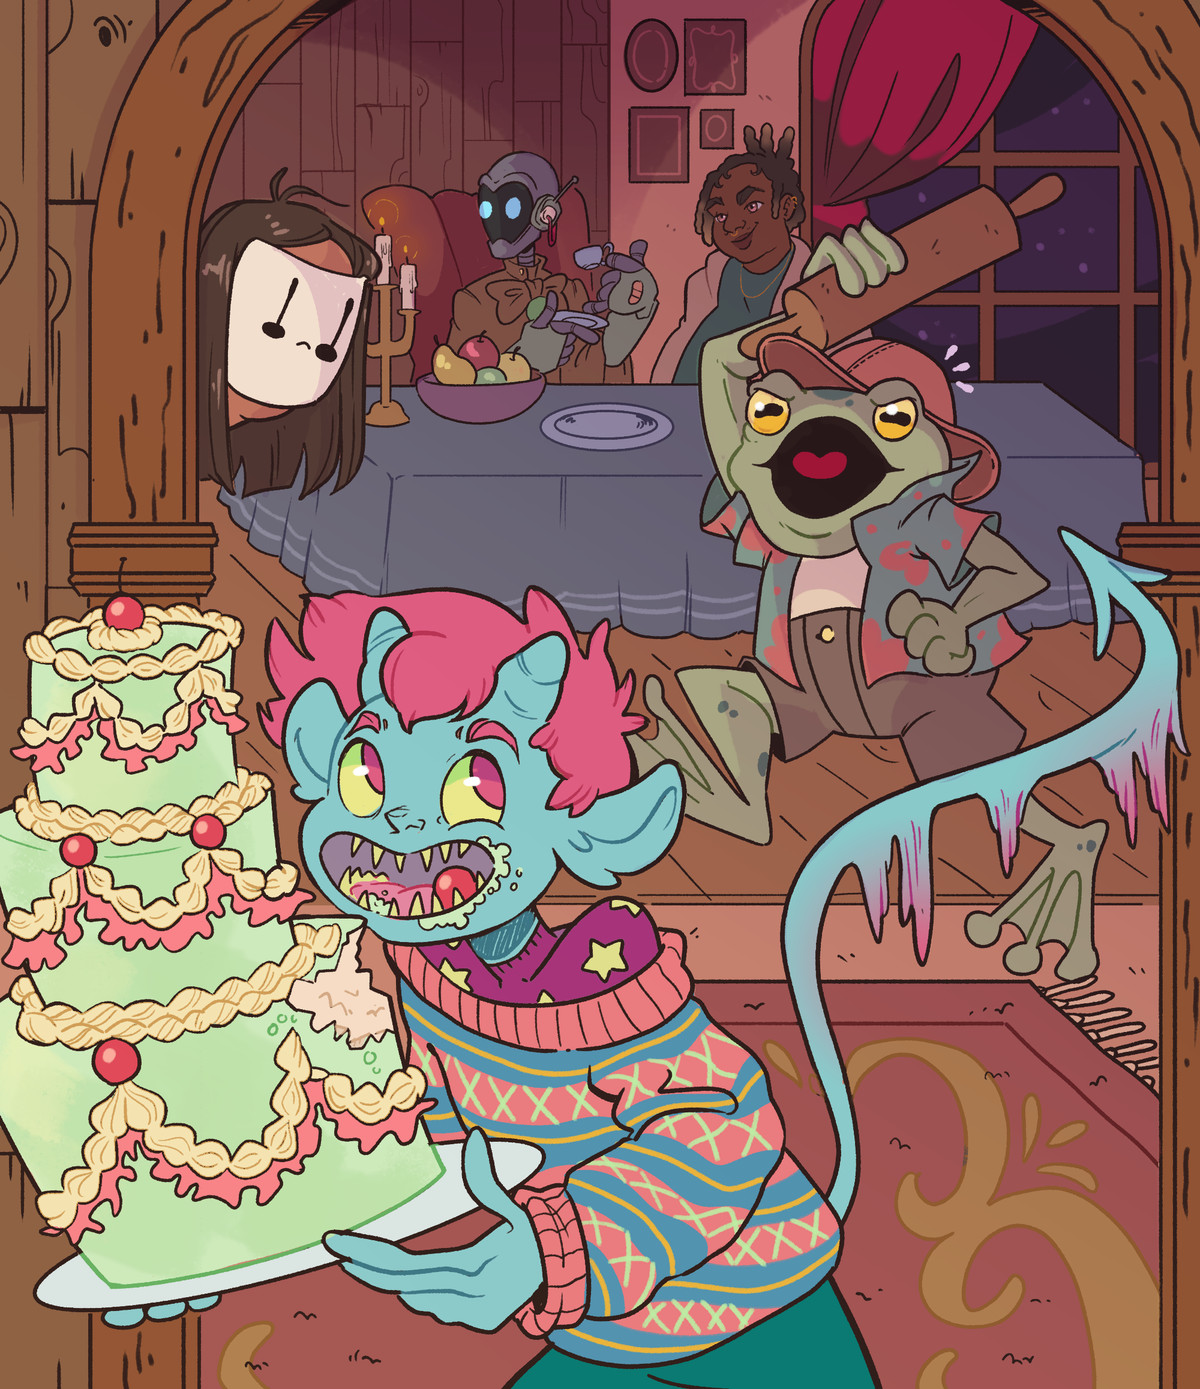 A larger version of the cropped image, showing more characters from the bead and breakfast. The include a Black person, a robot, a frog, and someone in a white mask.